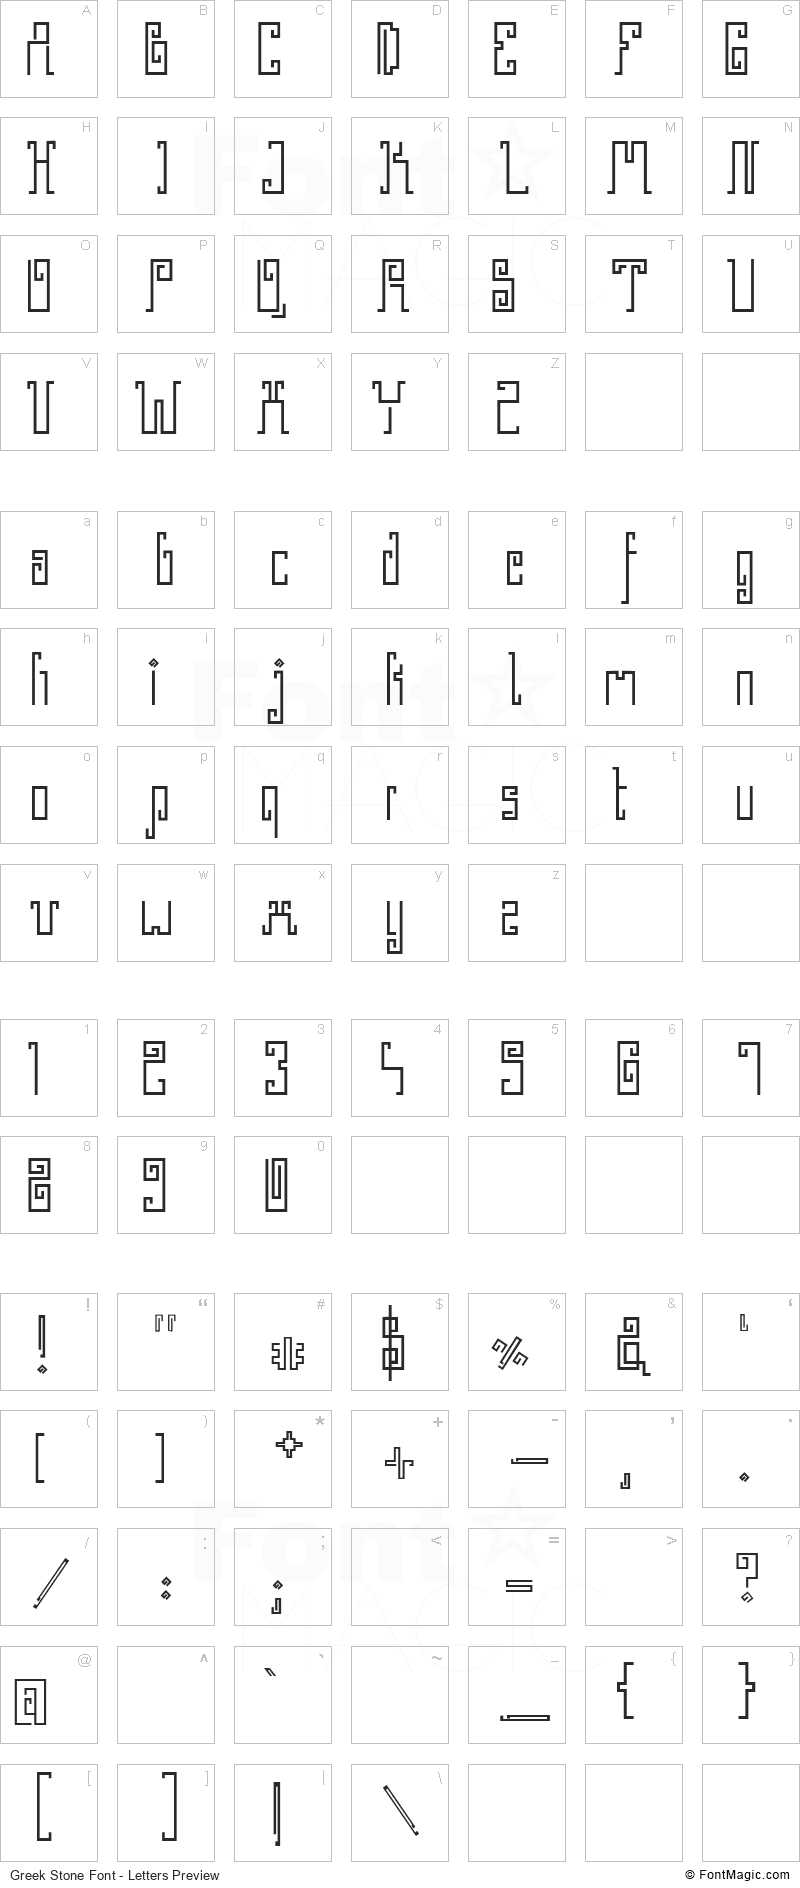 Greek Stone Font - All Latters Preview Chart